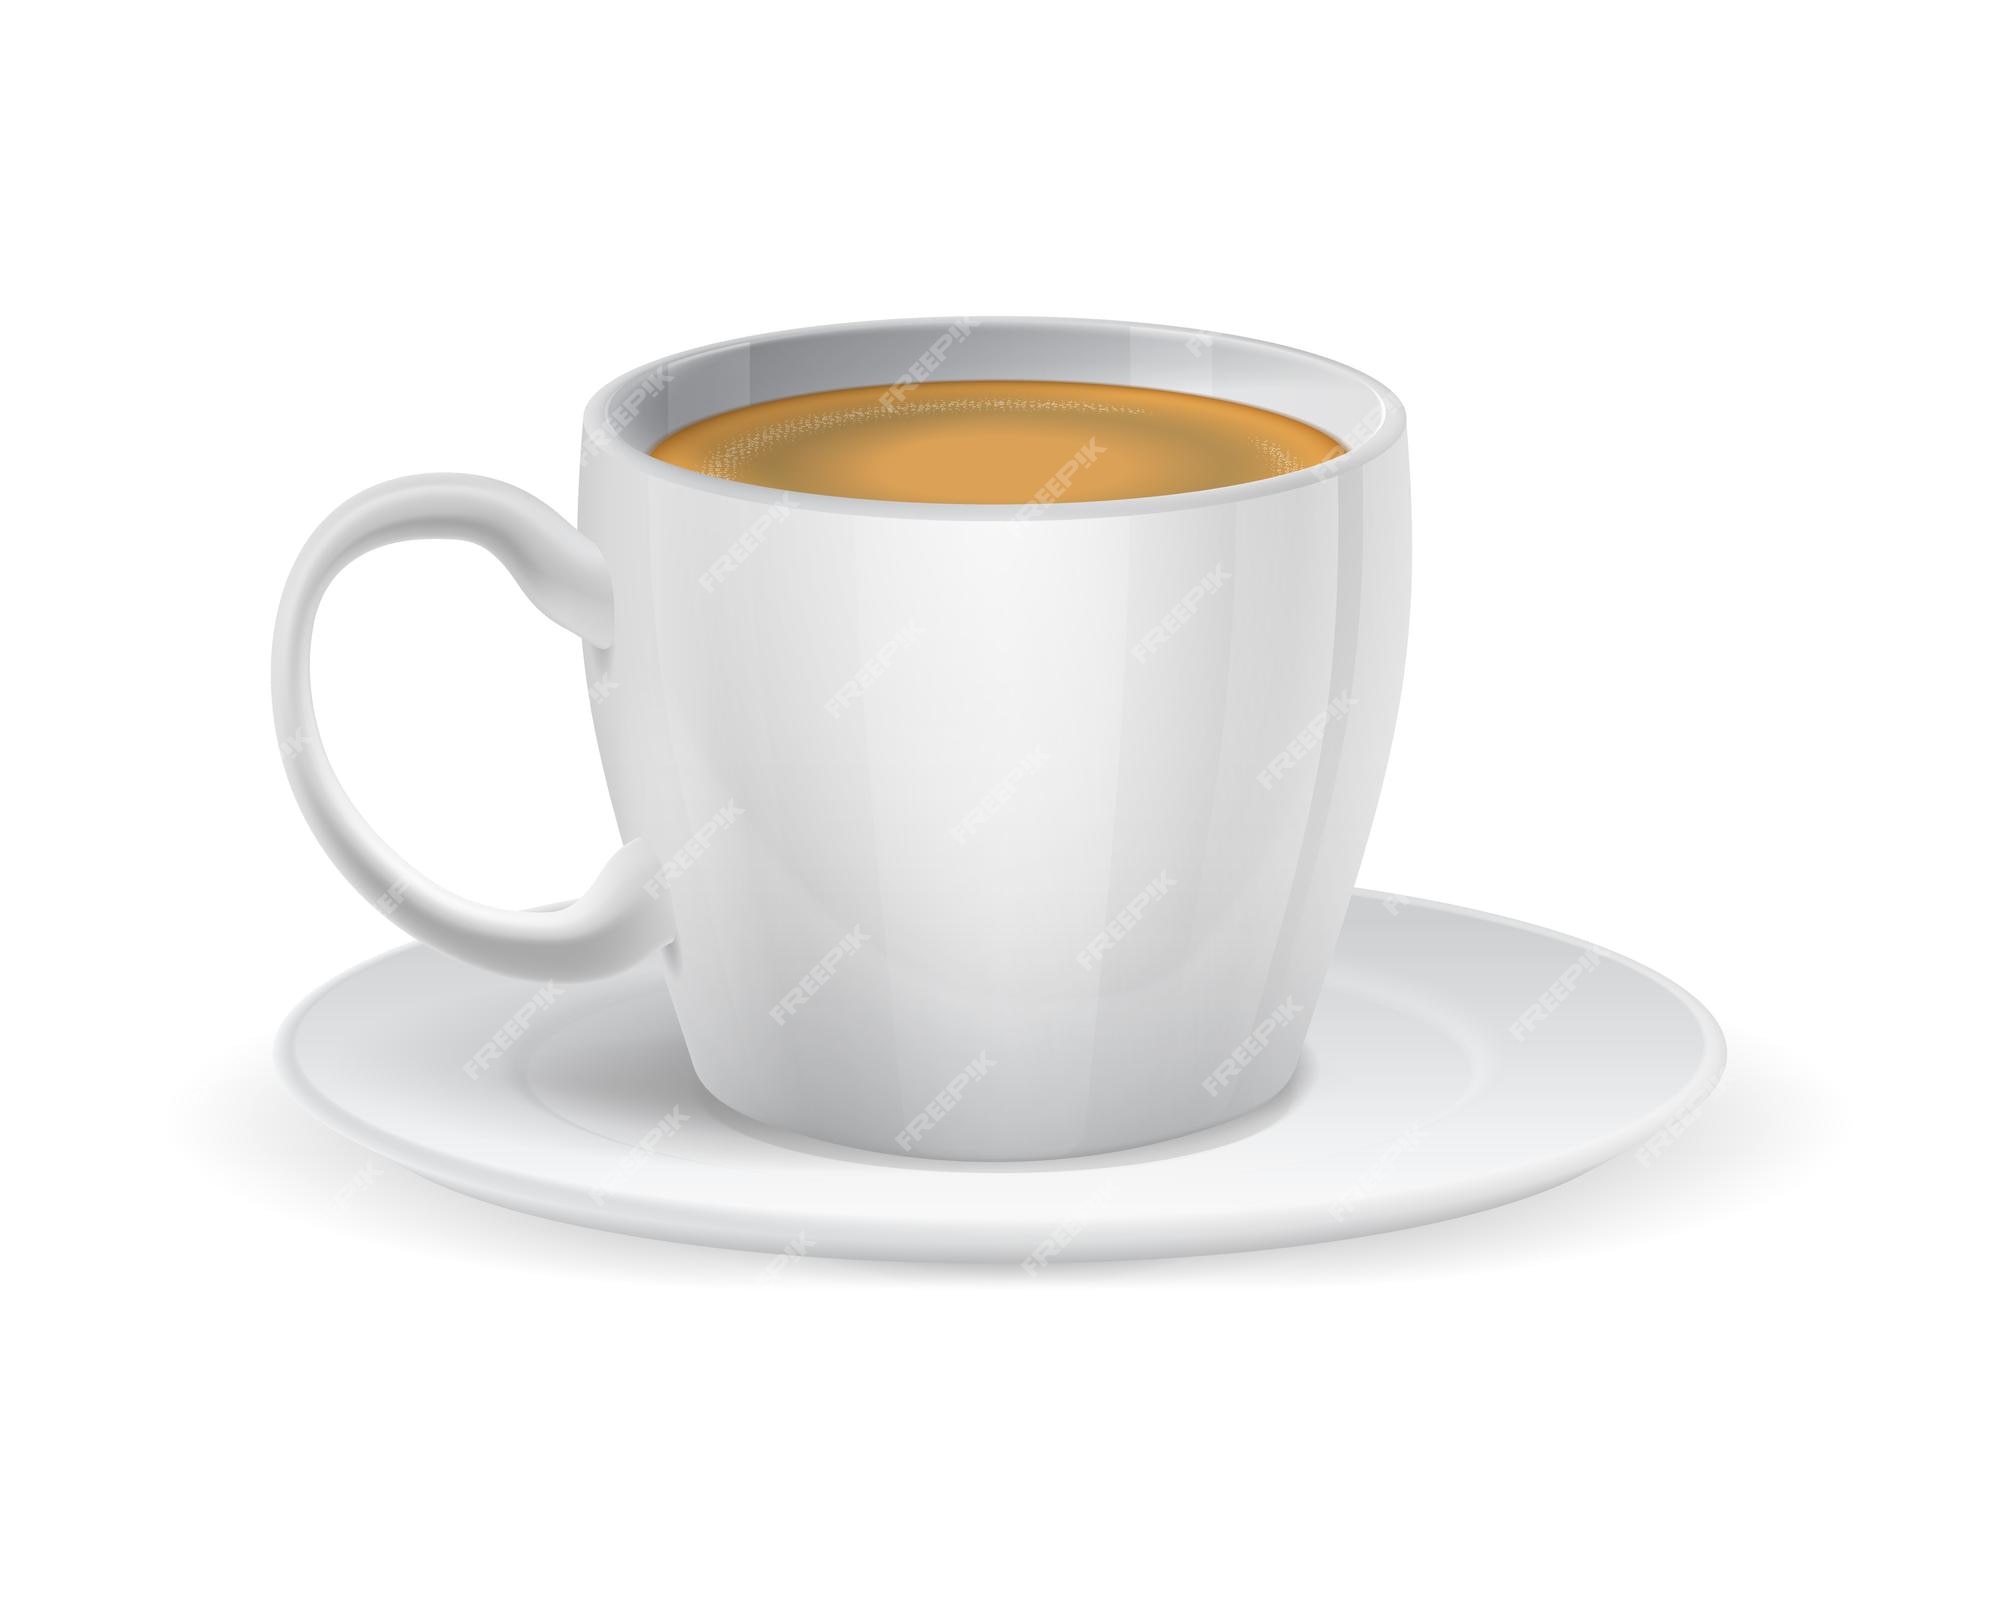 https://img.freepik.com/premium-vector/realistic-white-coffee-cup-with-espresso-drink-mug-plate-side-view-ceramic-tableware-hot-beverages-delicious-cappuccino-cafe-restaurant-isolated-menu-element-vector-single-3d-object_176516-5391.jpg?w=2000